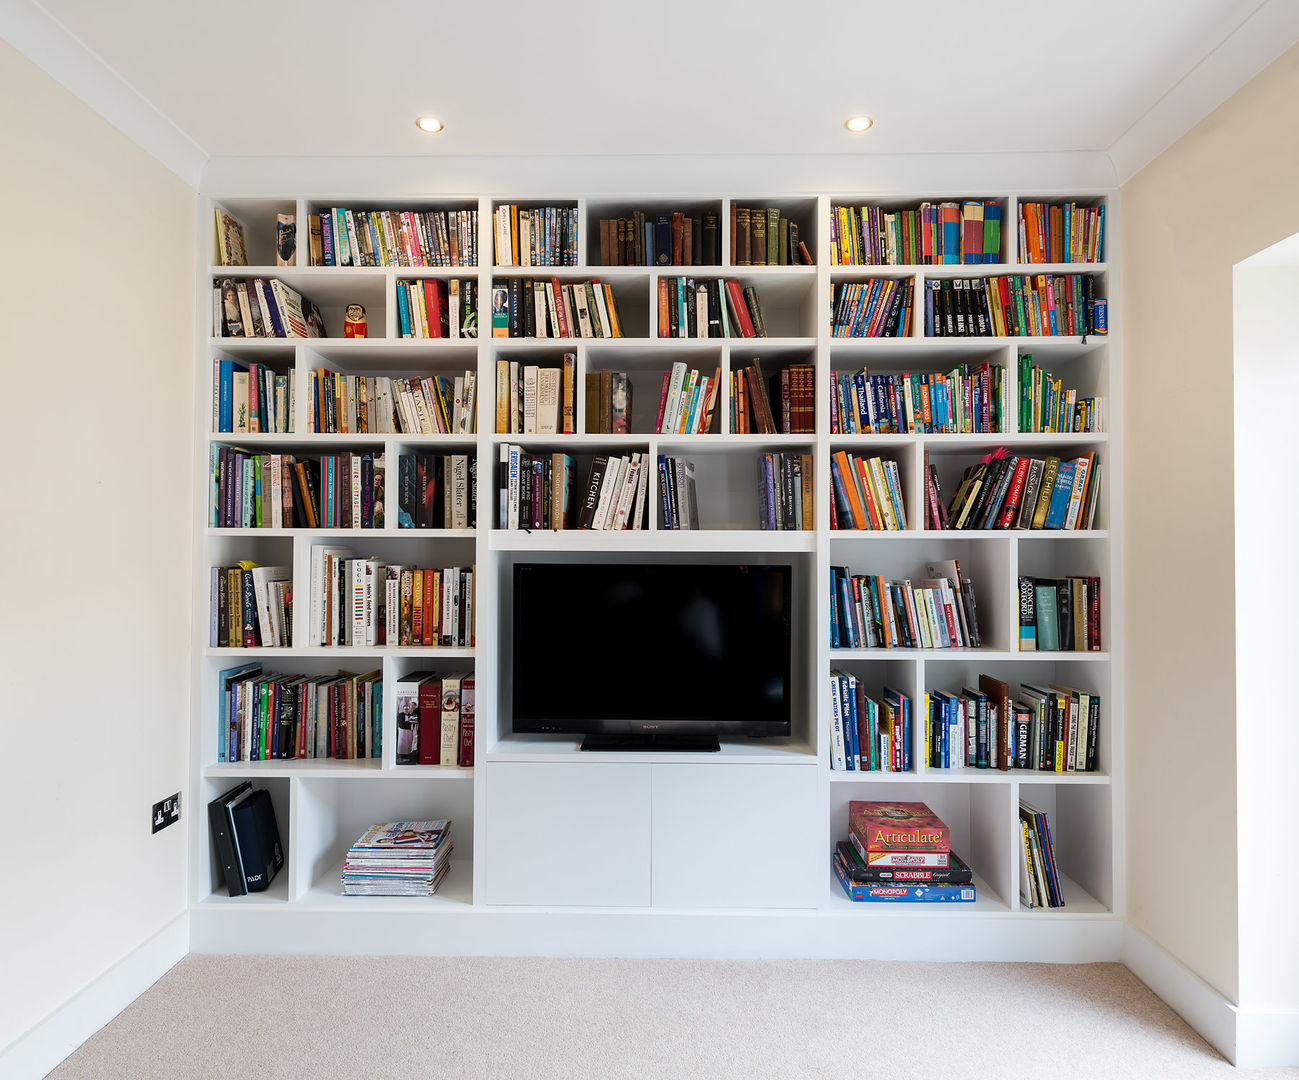 homify Modern style media rooms